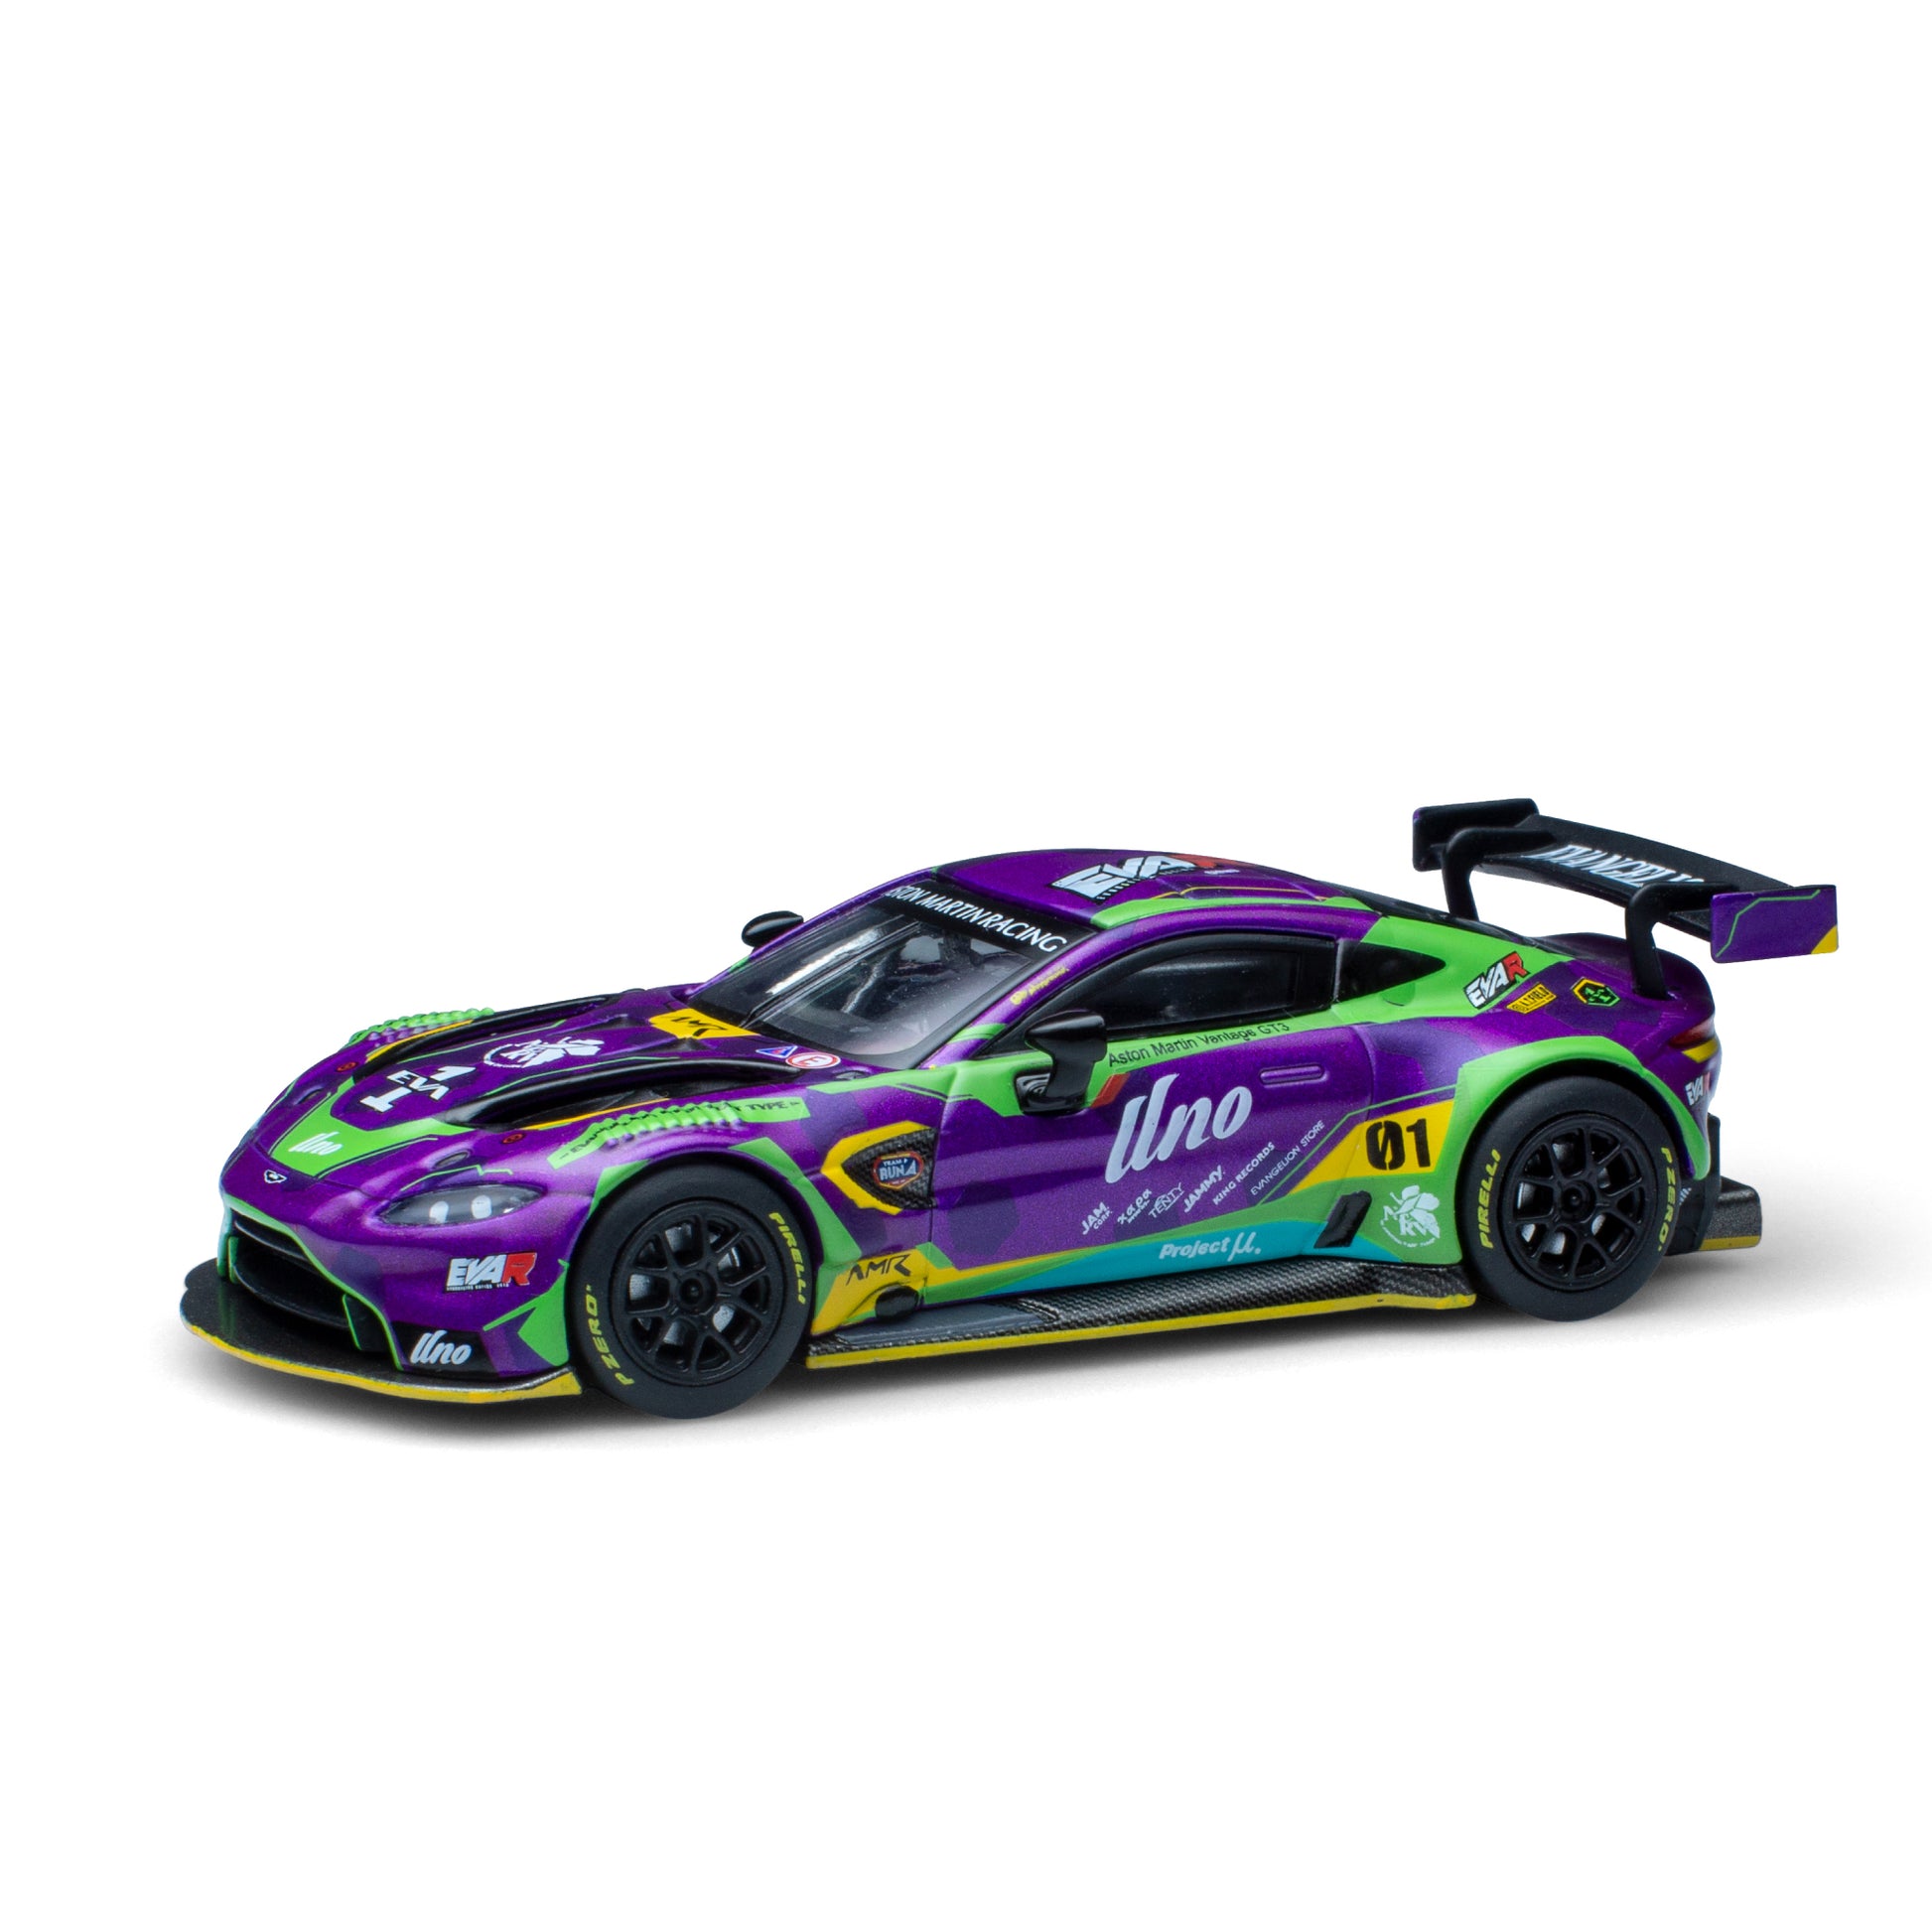 Aston Martin GT3 RHD (Right Hand Drive) EVA RT Test Type-01 Purple with  Graphics 1/64 Diecast Model Car by Pop Race 